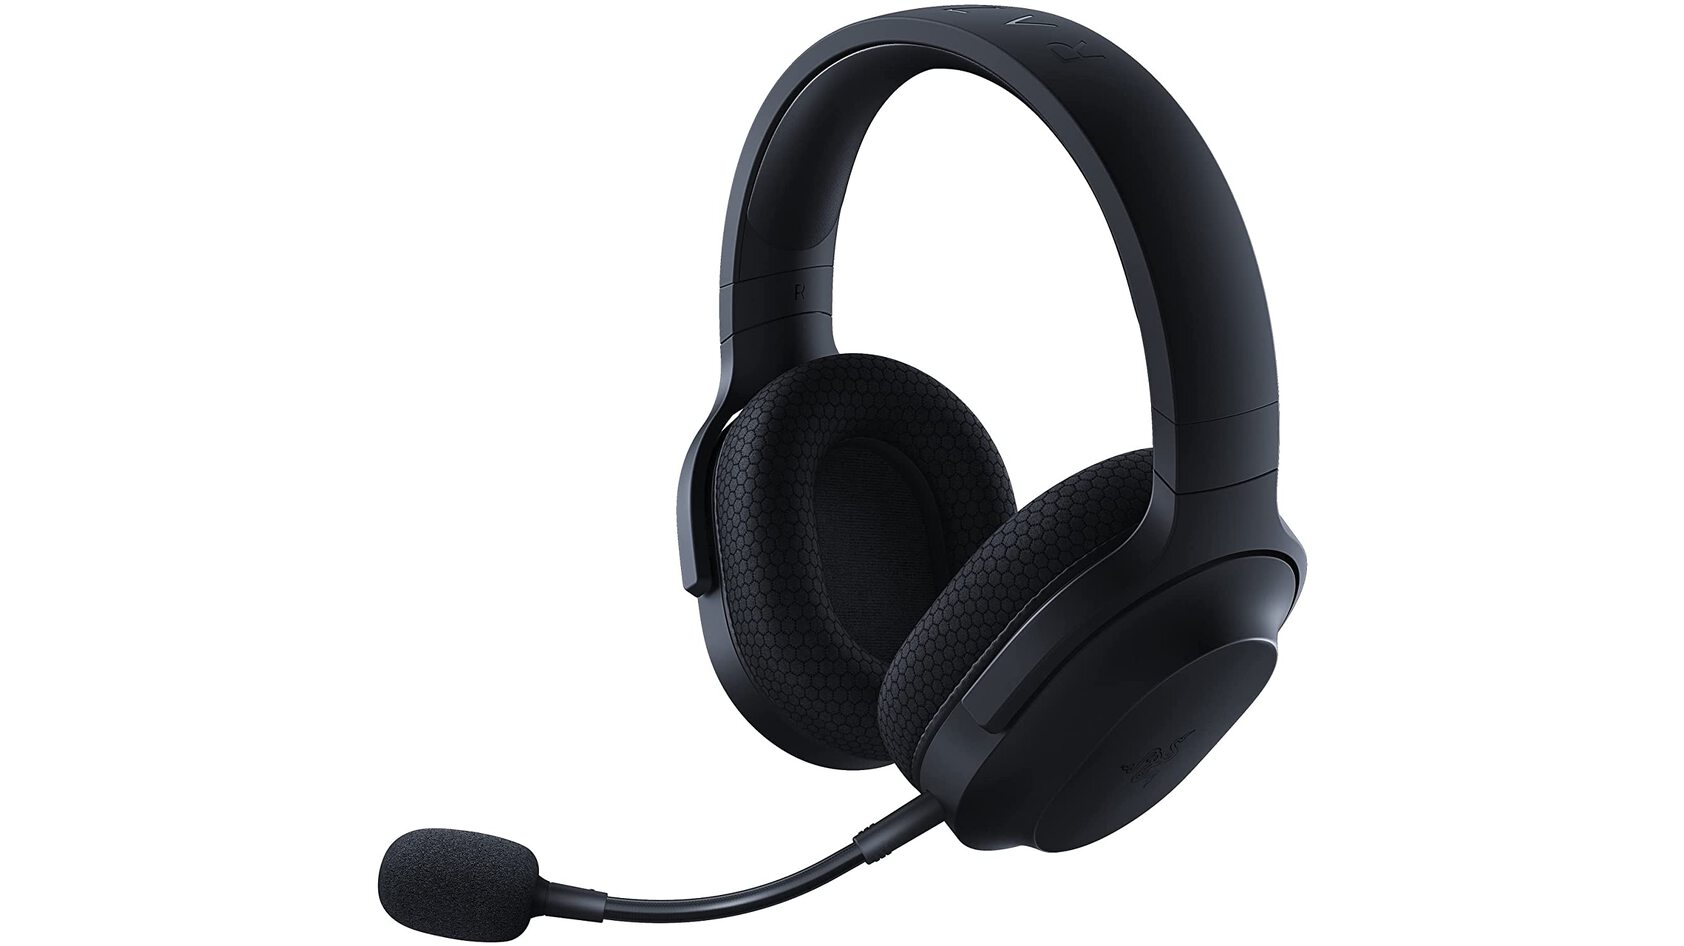 Insignia™ Stereo Headset for Steam Deck, Steam Deck OLED & PC